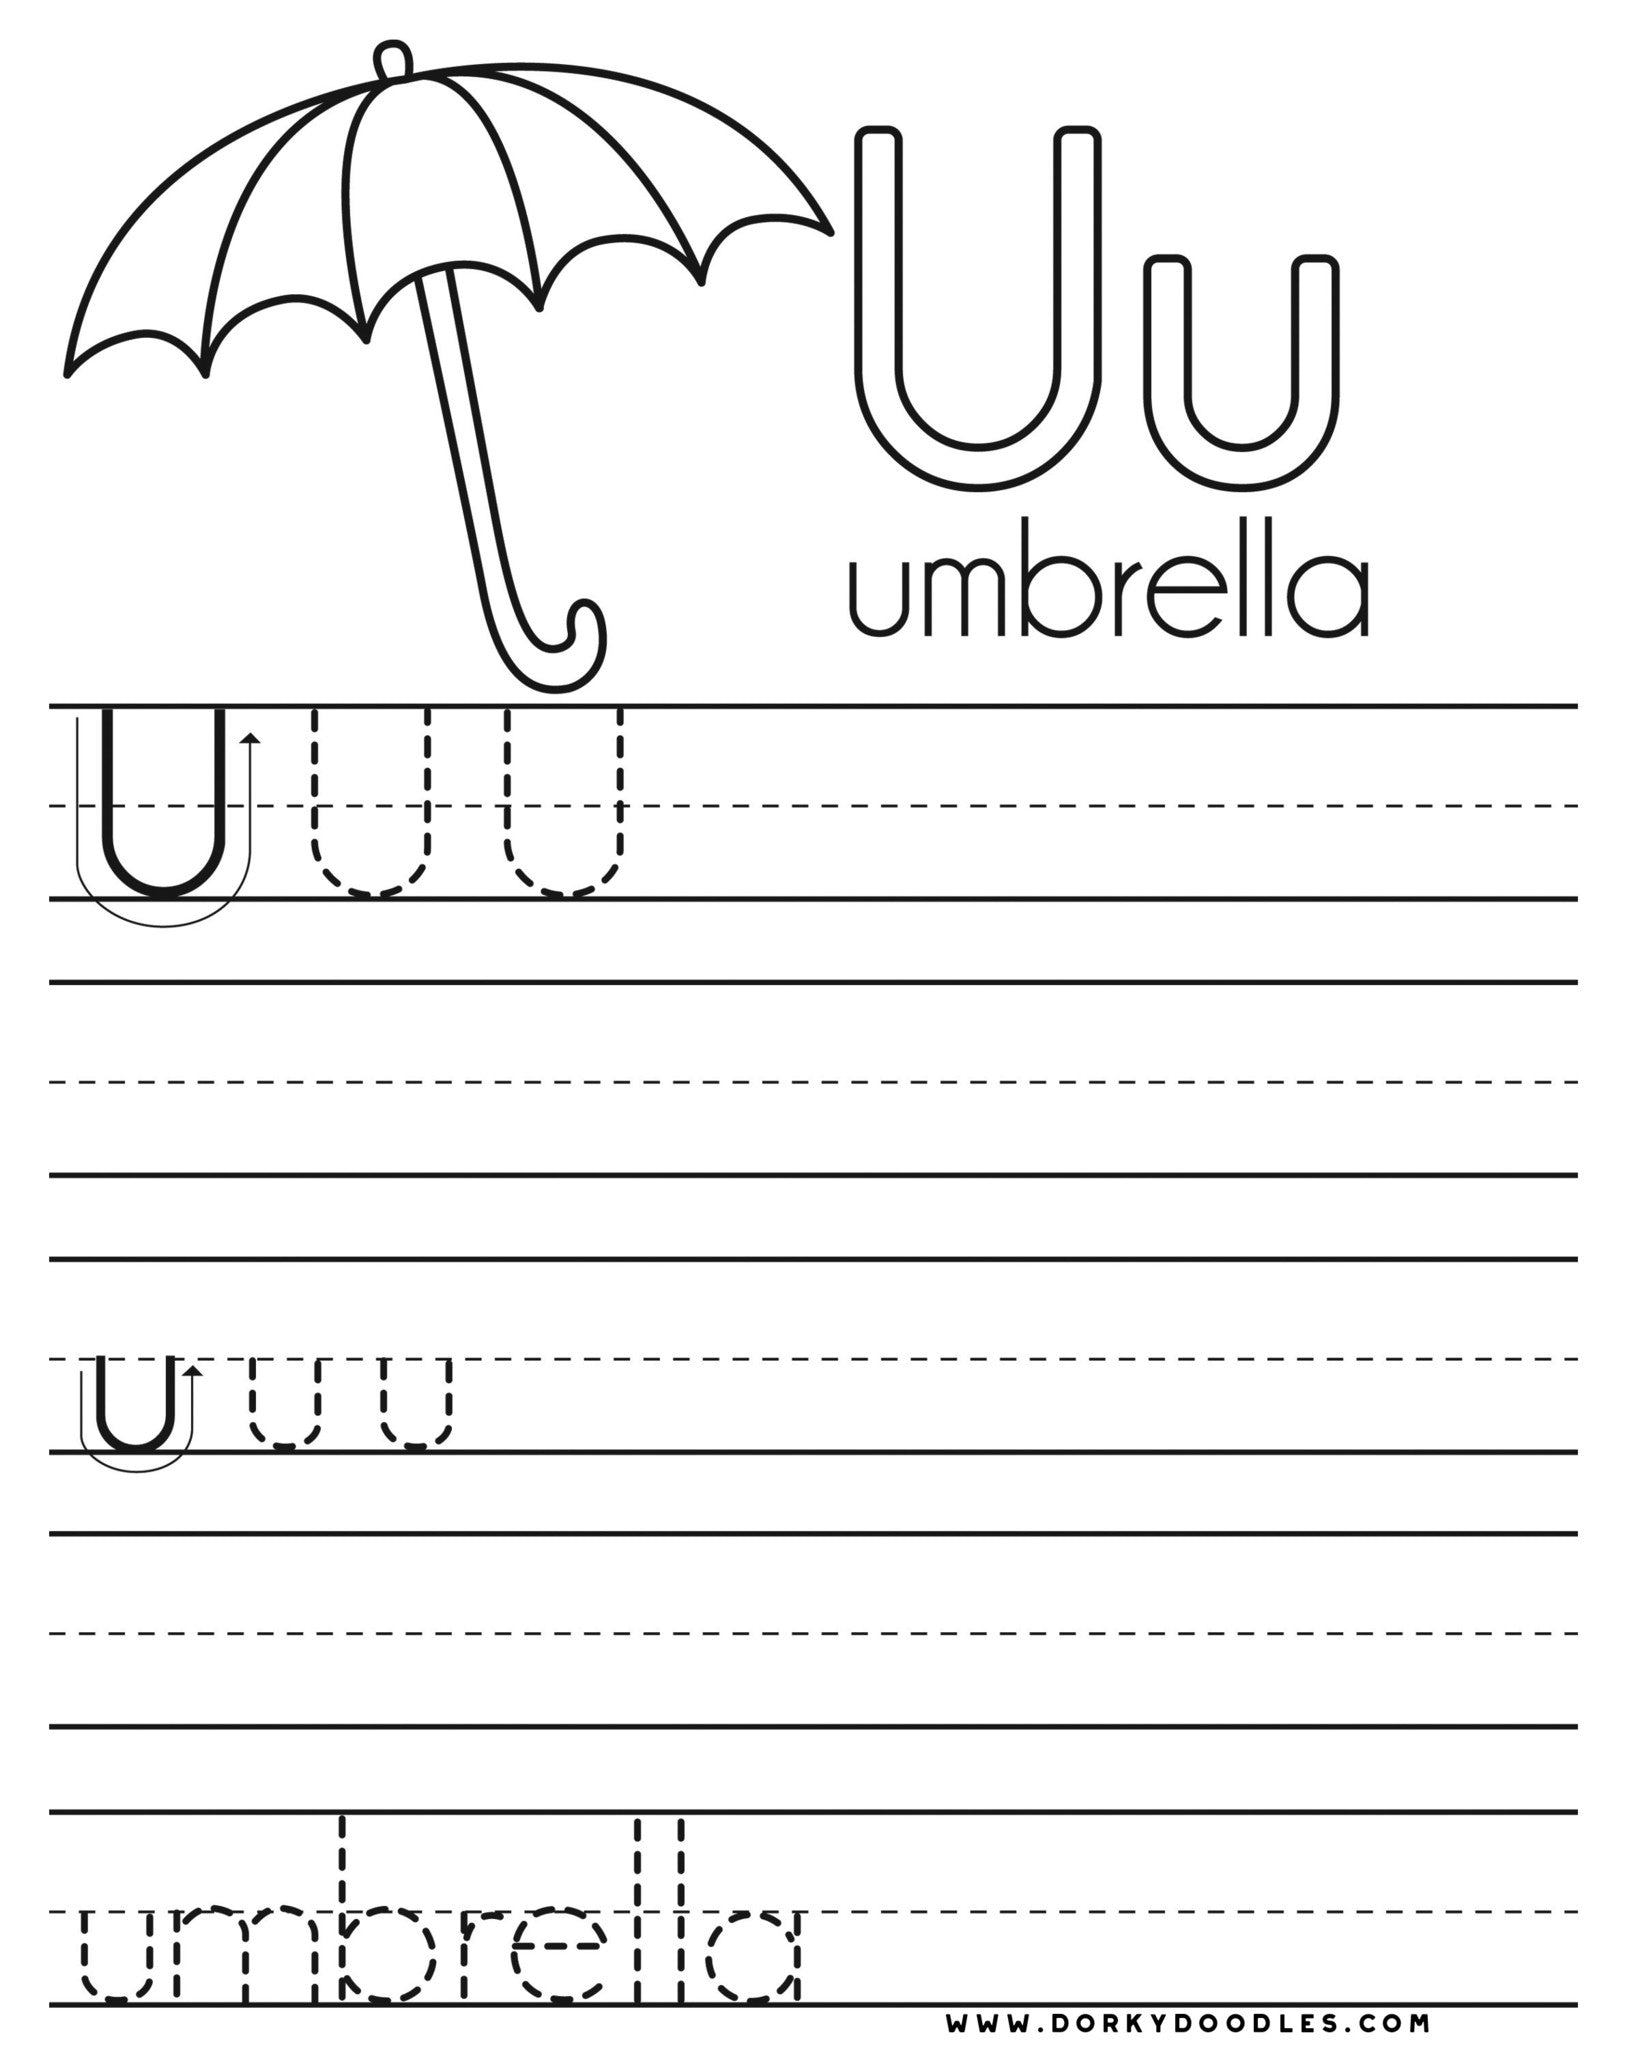 Download Letter U Writing Practice and Coloring Page - Dorky Doodles